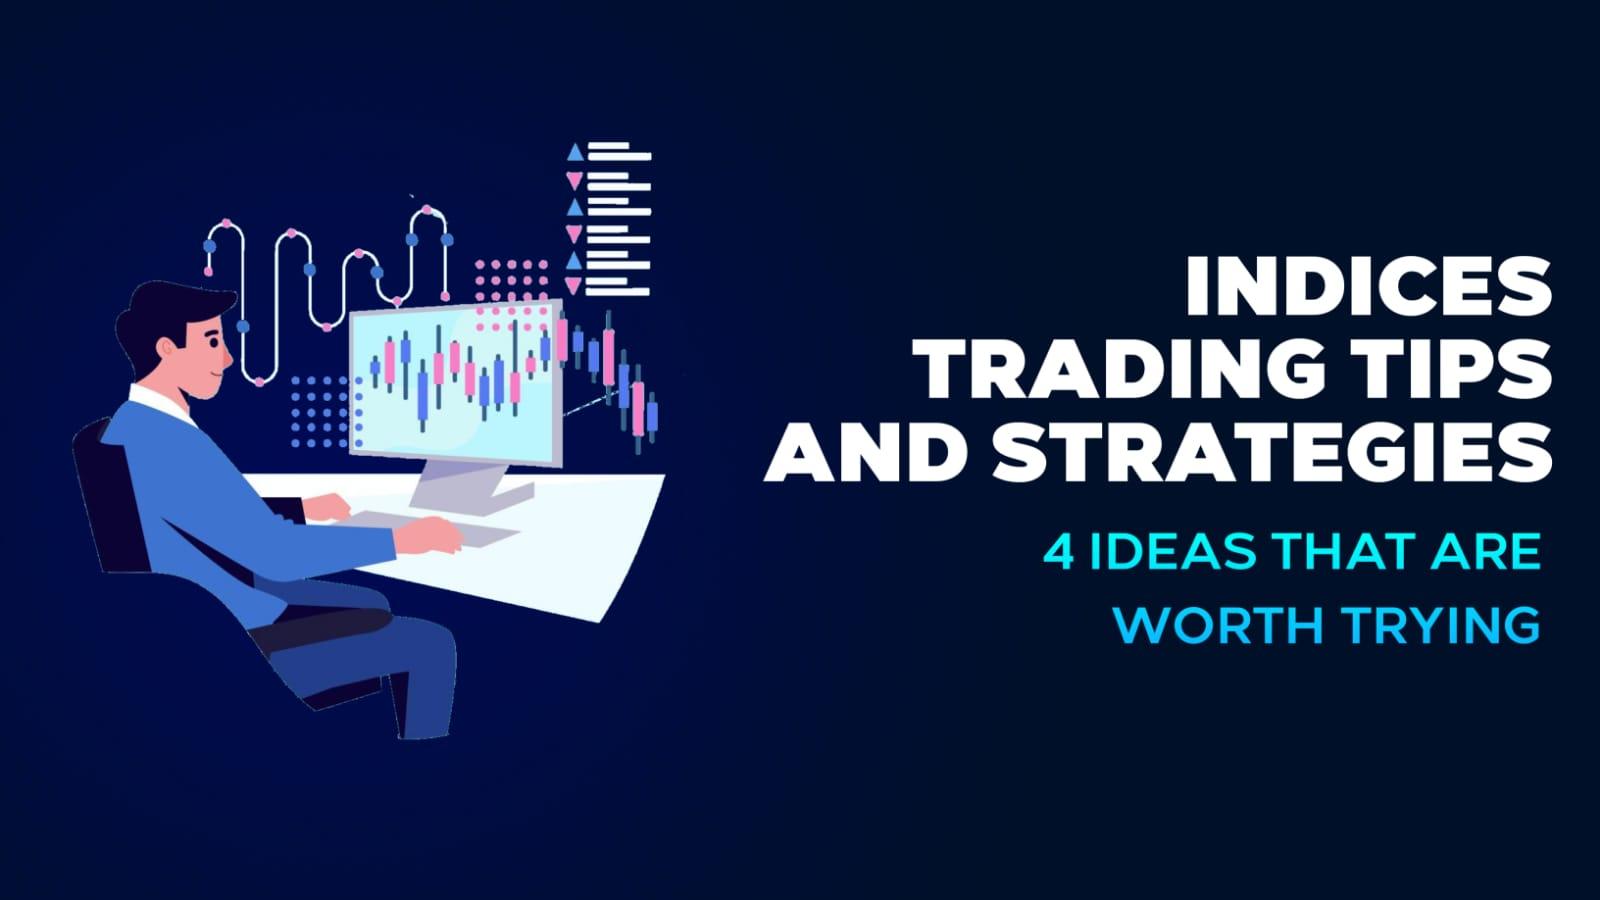 Indices Trading Tips And Strategies - 4 Ideas That Are Worth Trying